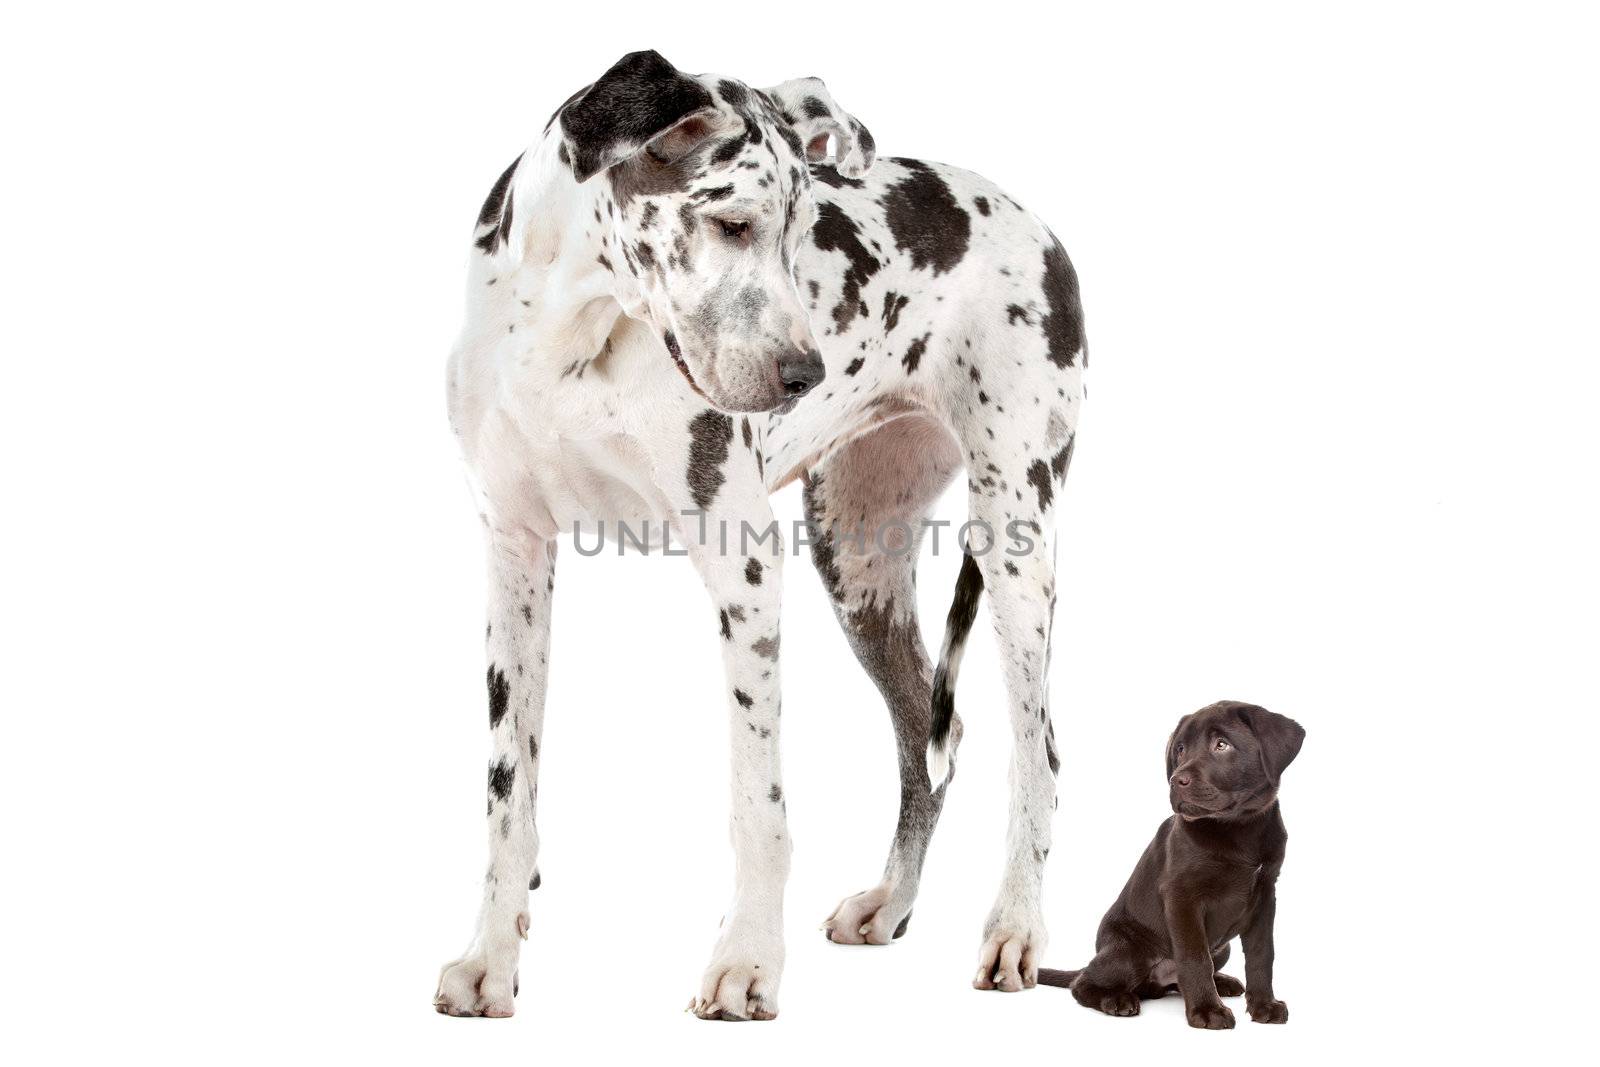 A Great Dane harlequin and a chocolate Labrador puppy in front of a white background